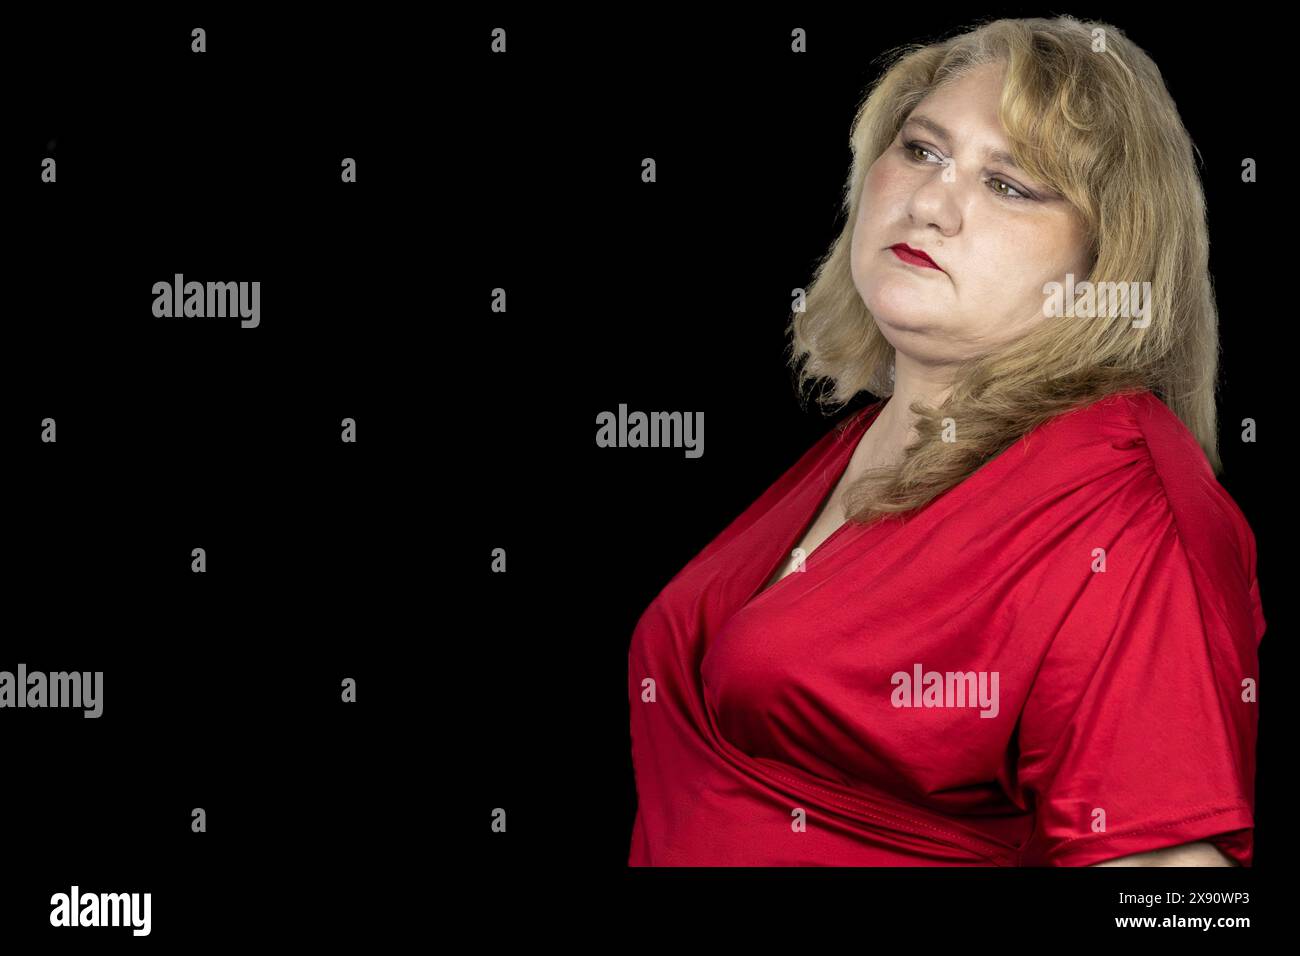 The image beautifully captures a 50-year-old Caucasian woman with blonde hair, radiating a sense of timeless beauty and elegance. Stock Photo